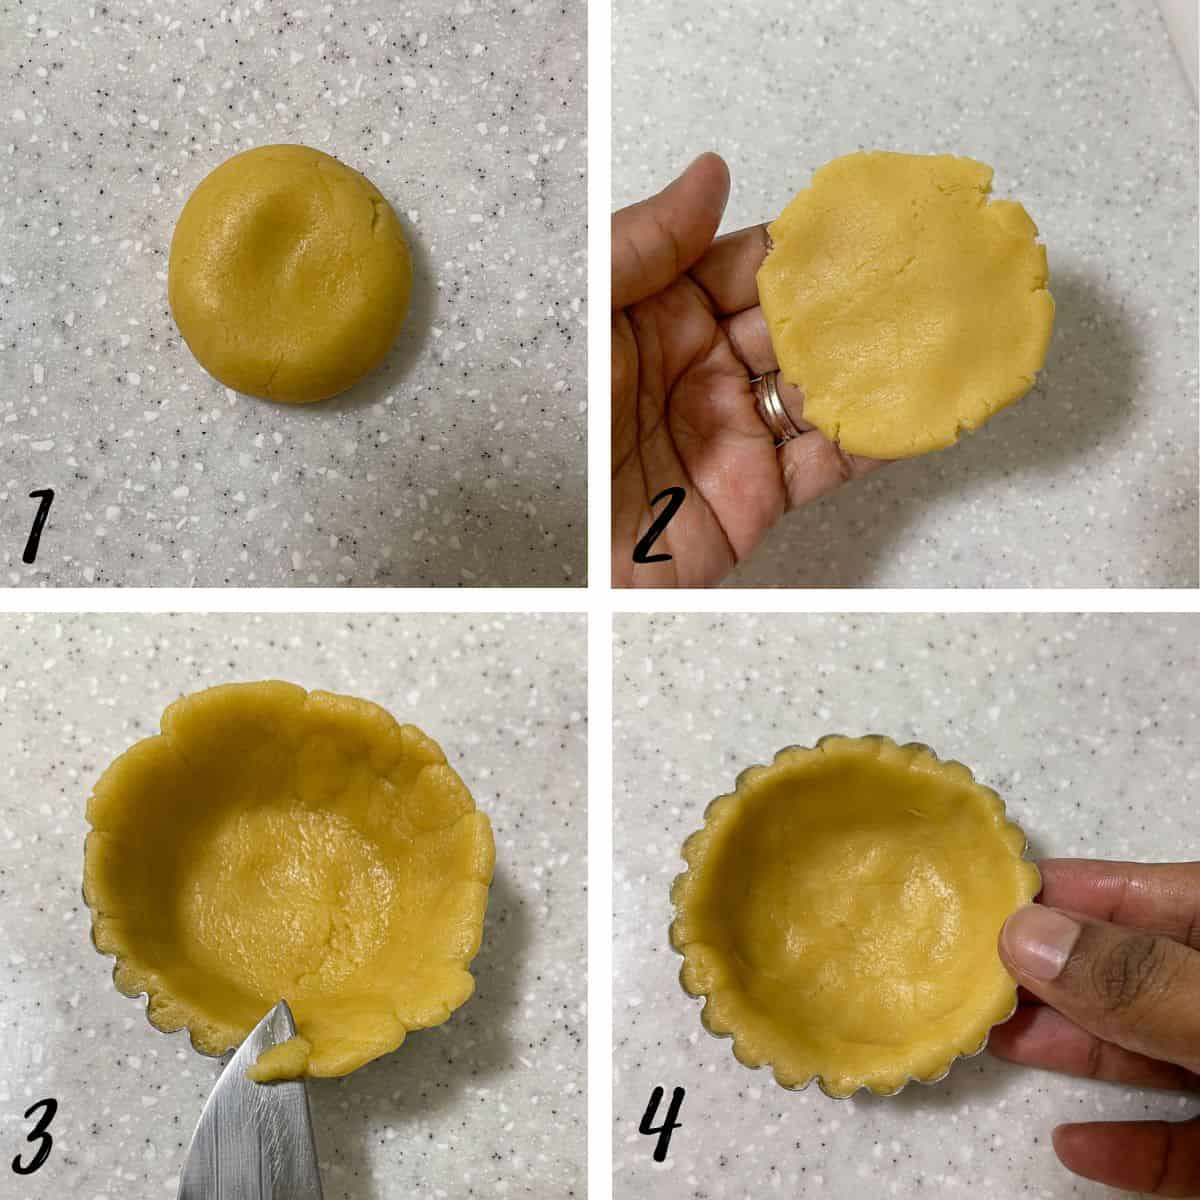 A poster of 4 images showing how to fill a tart mold with pastry.